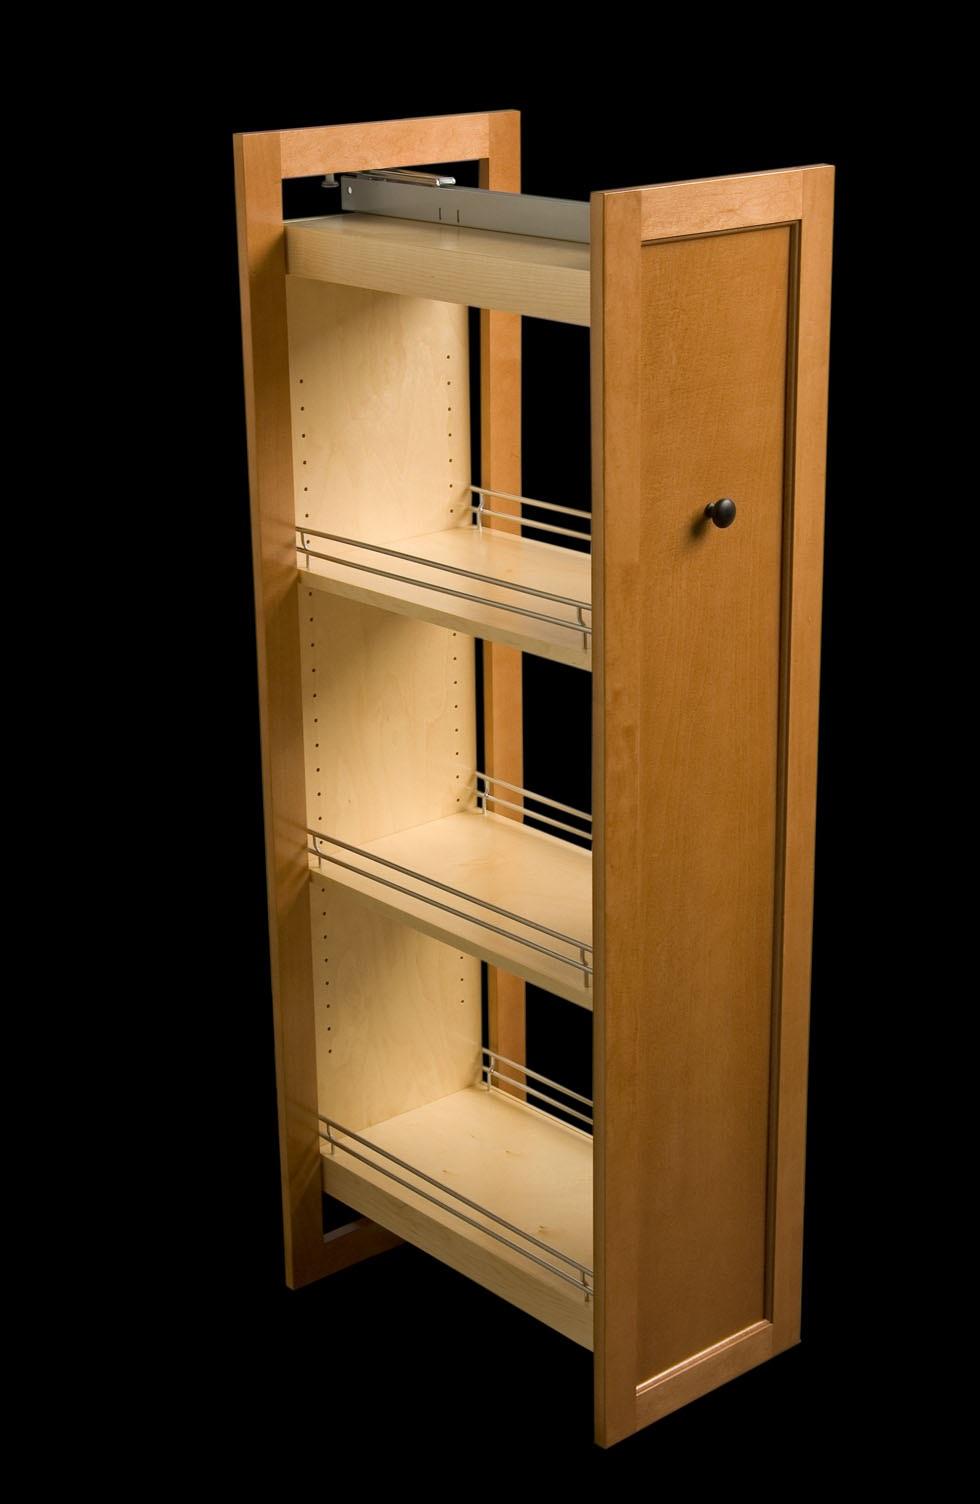 omega-national-evo-tall-pull-out-pantry.jpg